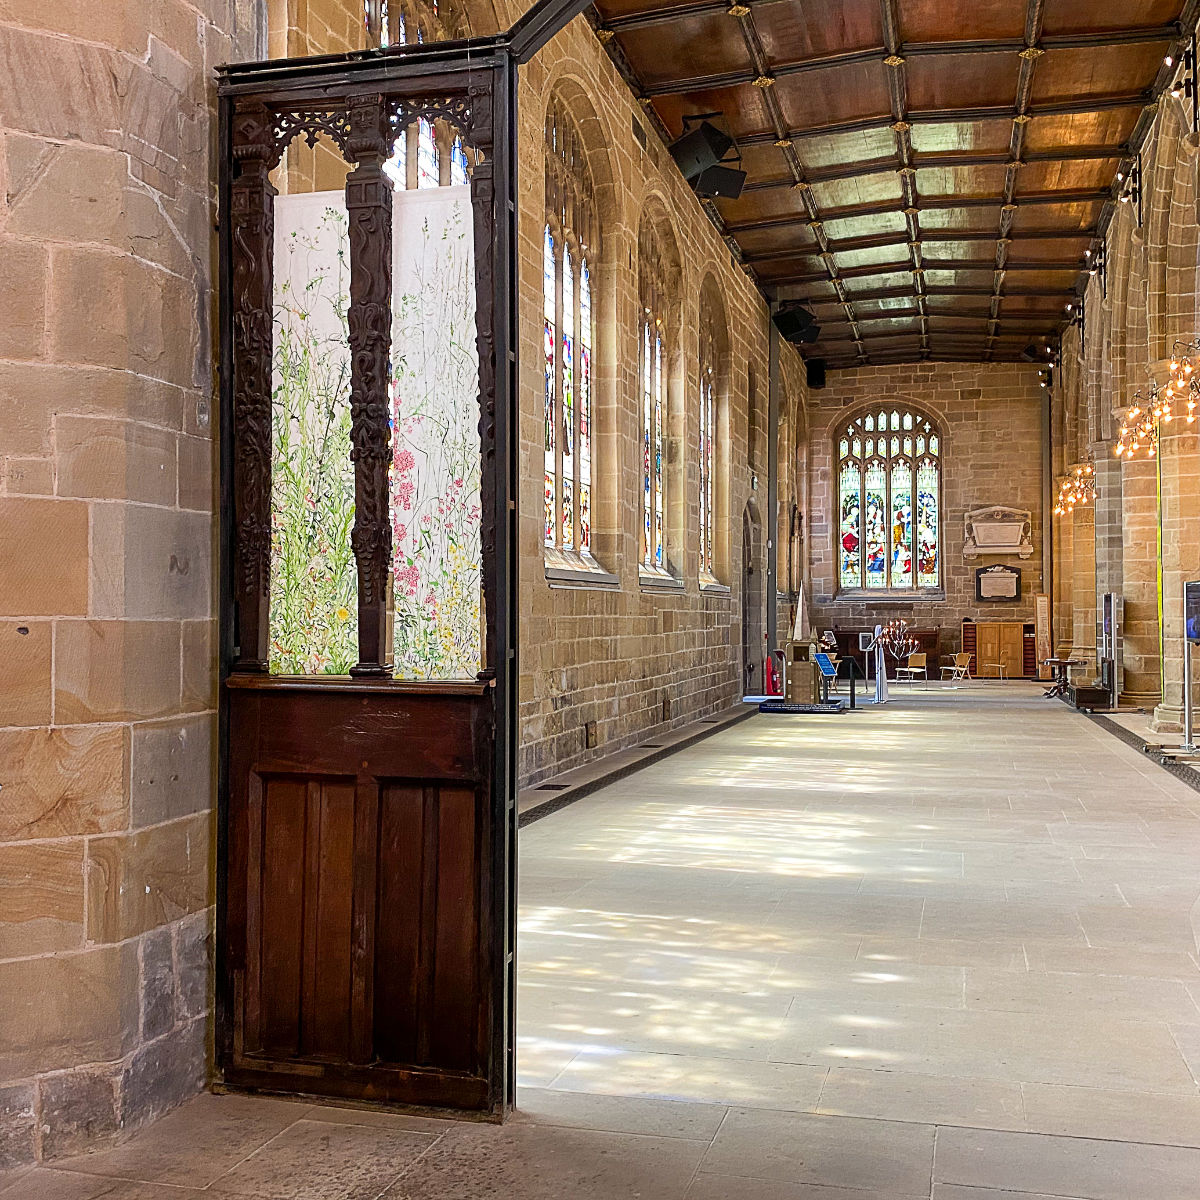 Two paintings by Helen Thomas in the wooden screen, south aisle, wakefield Cathedral